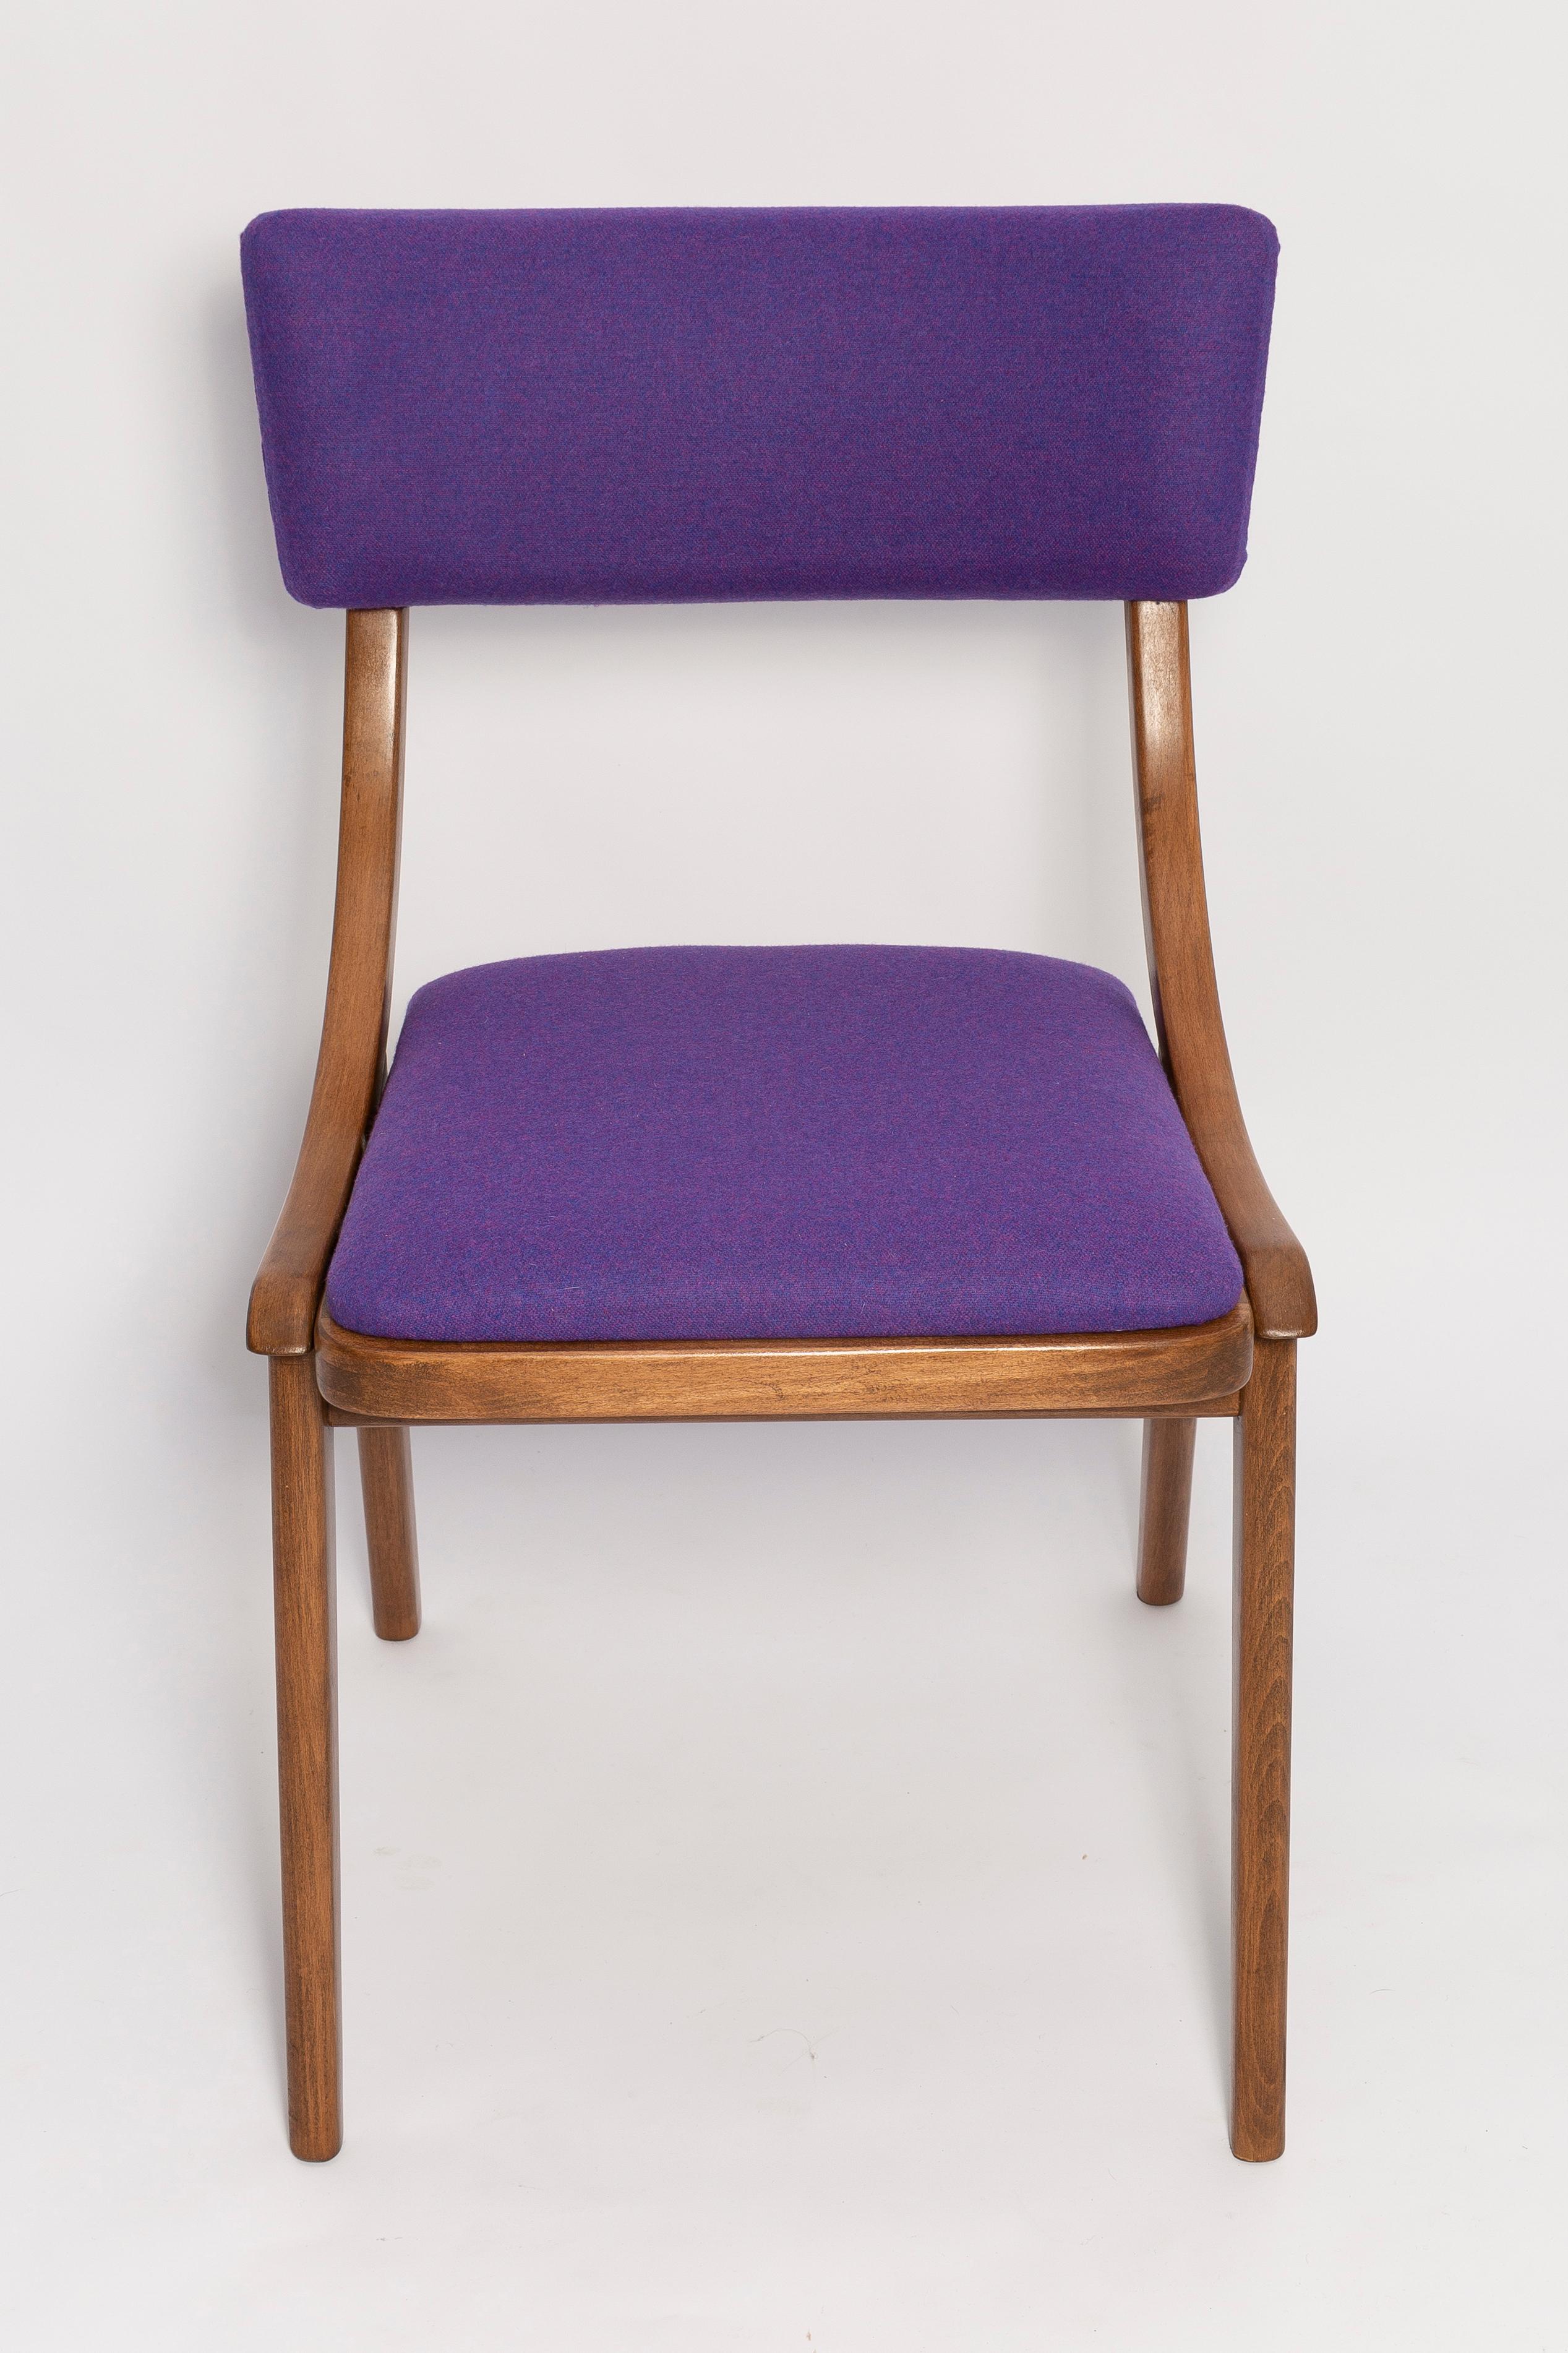 Textile Mid Century Modern Bumerang Chair, Purple Violet Wool, Poland, 1960s For Sale